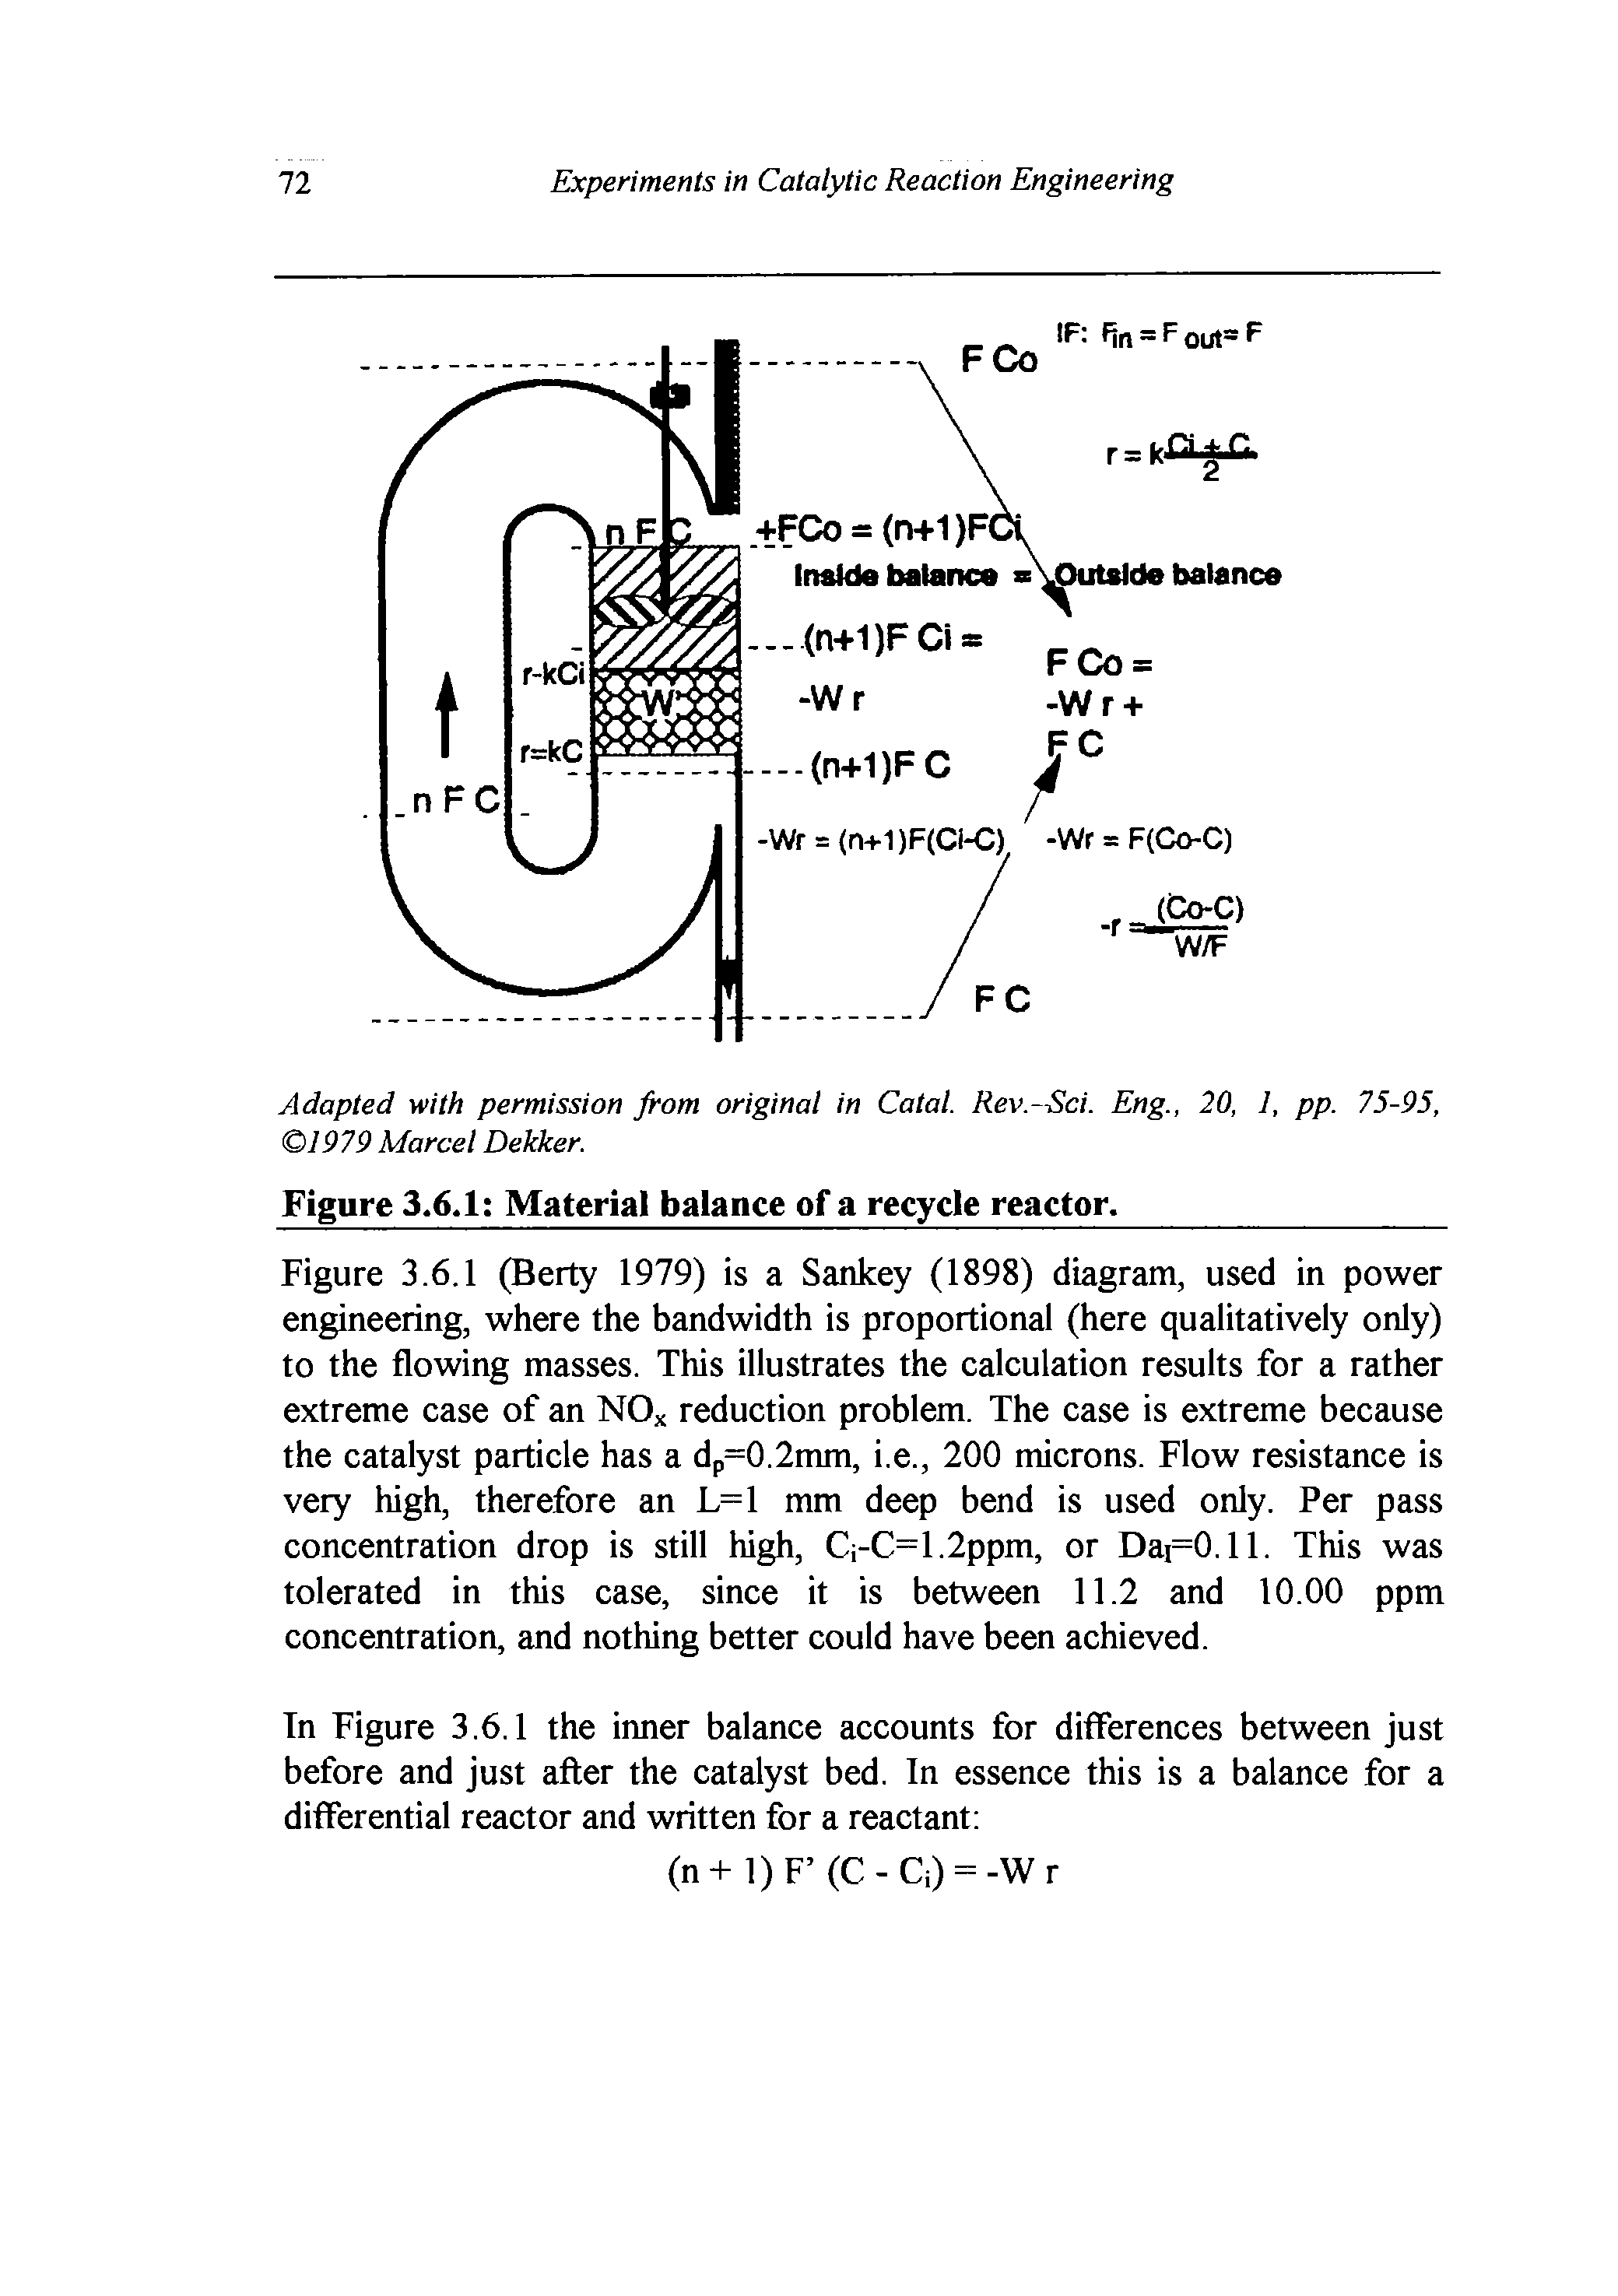 Figure 3.6.1 (Berty 1979) is a Sankey (1898) diagram, used in power engineering, where the bandwidth is proportional (here qualitatively only) to the flowing masses. This illustrates the calculation results for a rather extreme case of an NOx reduction problem. The case is extreme because the catalyst particle has a dp=0.2mm, i.e., 200 microns. Flow resistance is very high, therefore an L=1 mm deep bend is used only. Per pass concentration drop is still high, Ci-C=1.2ppm, or Dai=0.11. This was tolerated in this case, since it is between 11.2 and 10.00 ppm concentration, and nothing better could have been achieved.